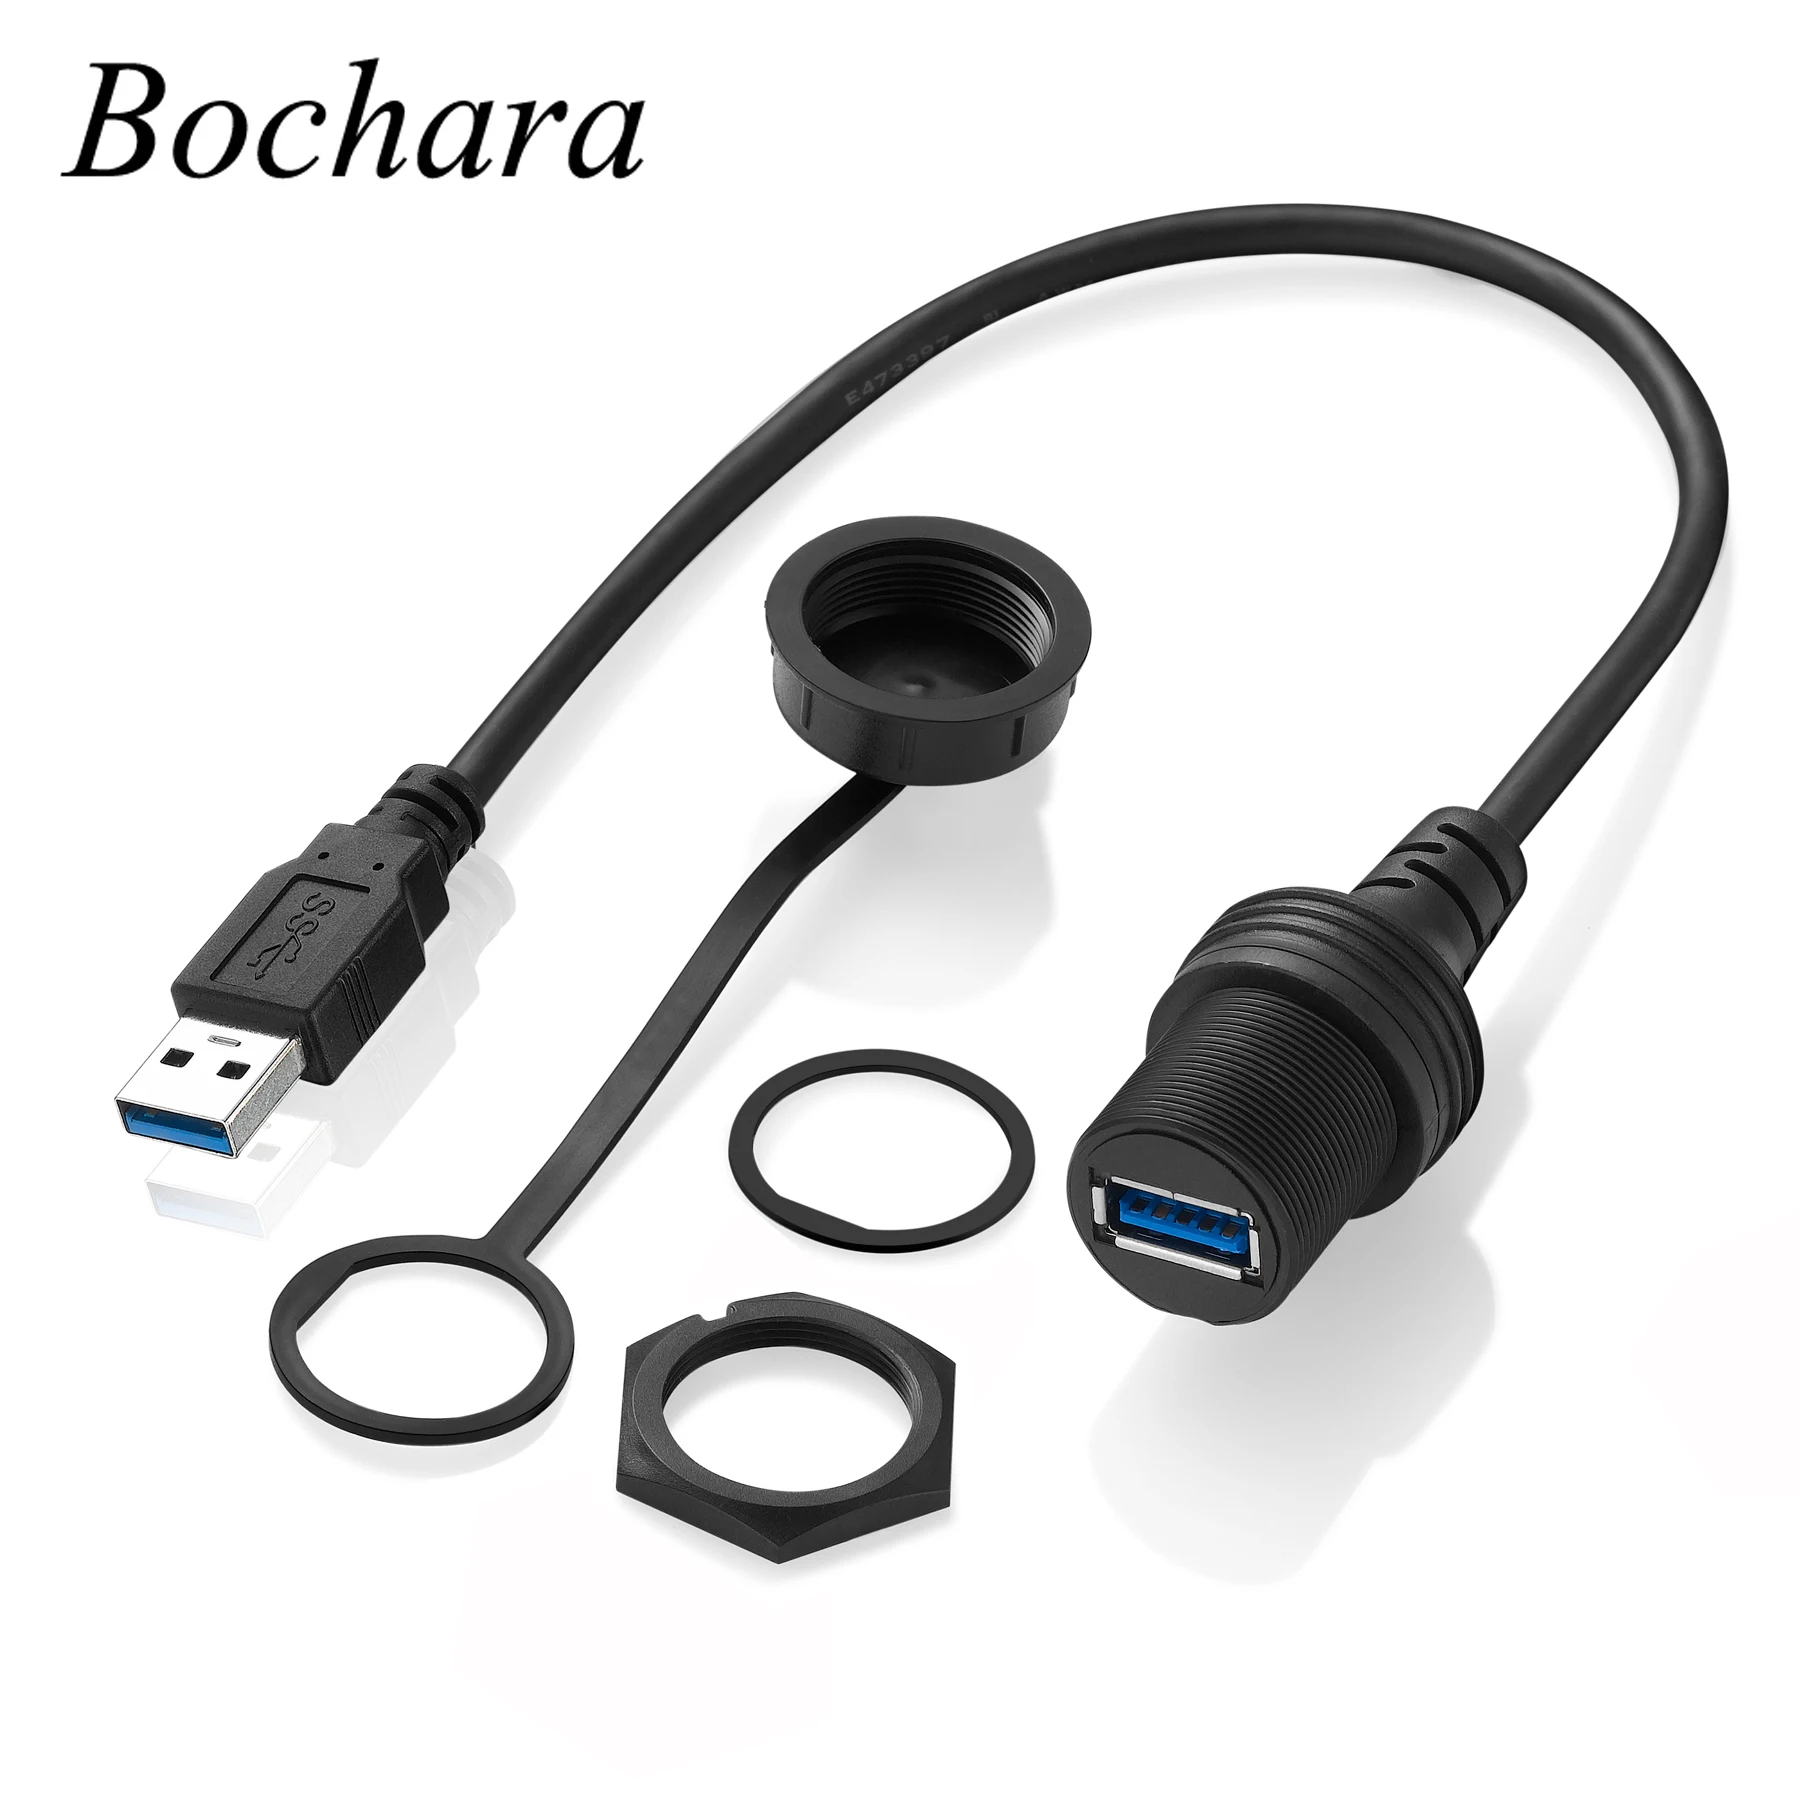 

Bochara USB3.0 USB2.0 Male to Female Dashboard Cable Flush Mount Panel Waterproof With Cover Shielded For Car Motorcycle Boat